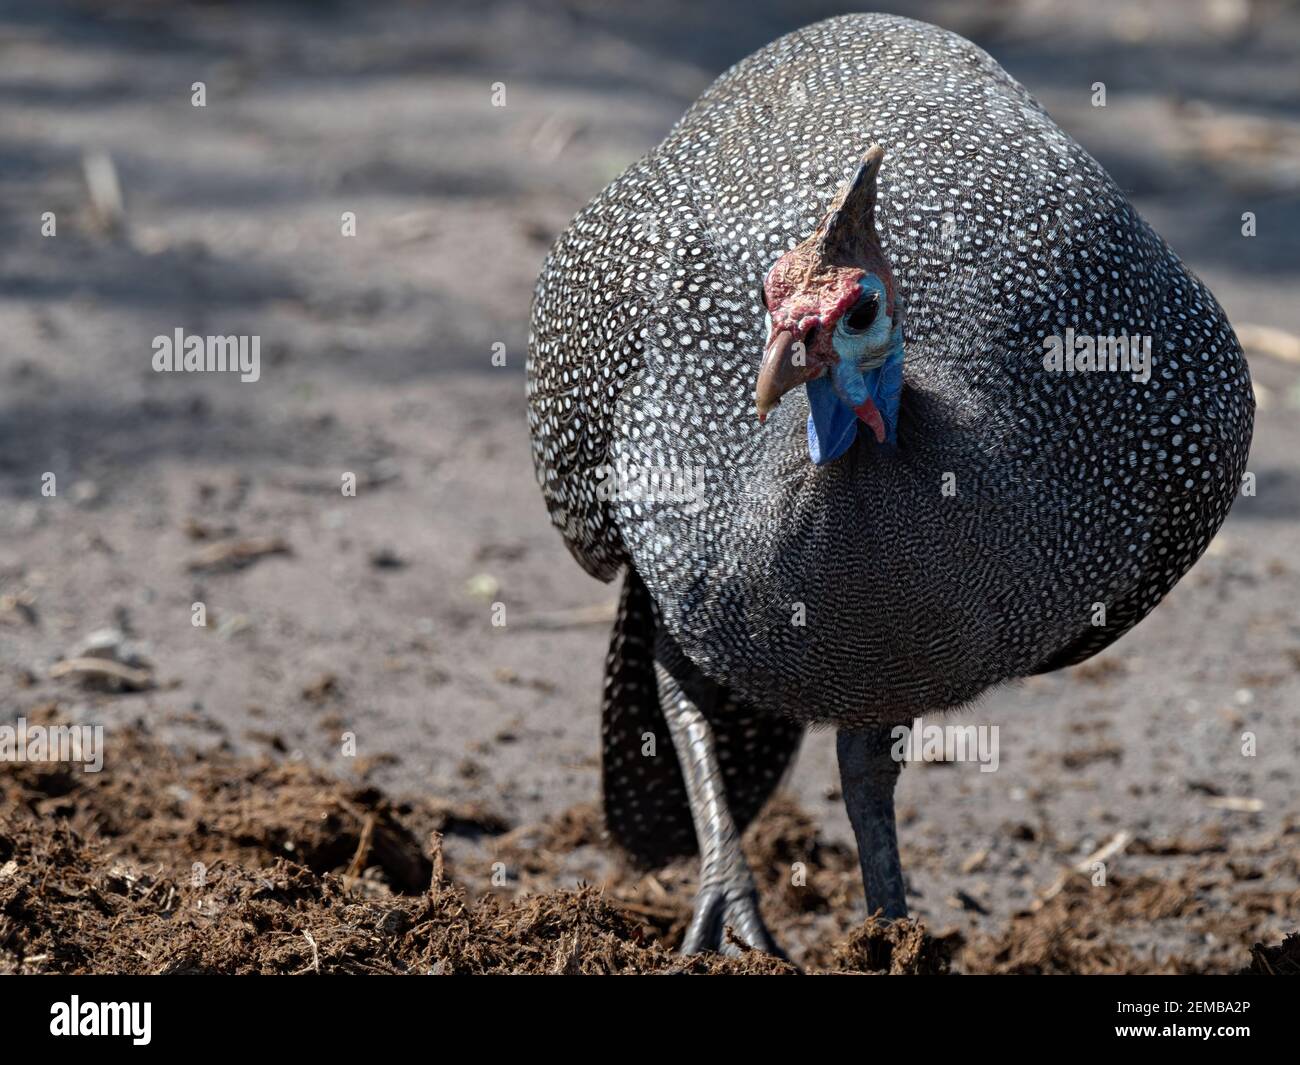 Close-up of a Helmeted Guineafowl (Numida meleagris) searching for food in the excrements of an elephant, Botsuana Stock Photo